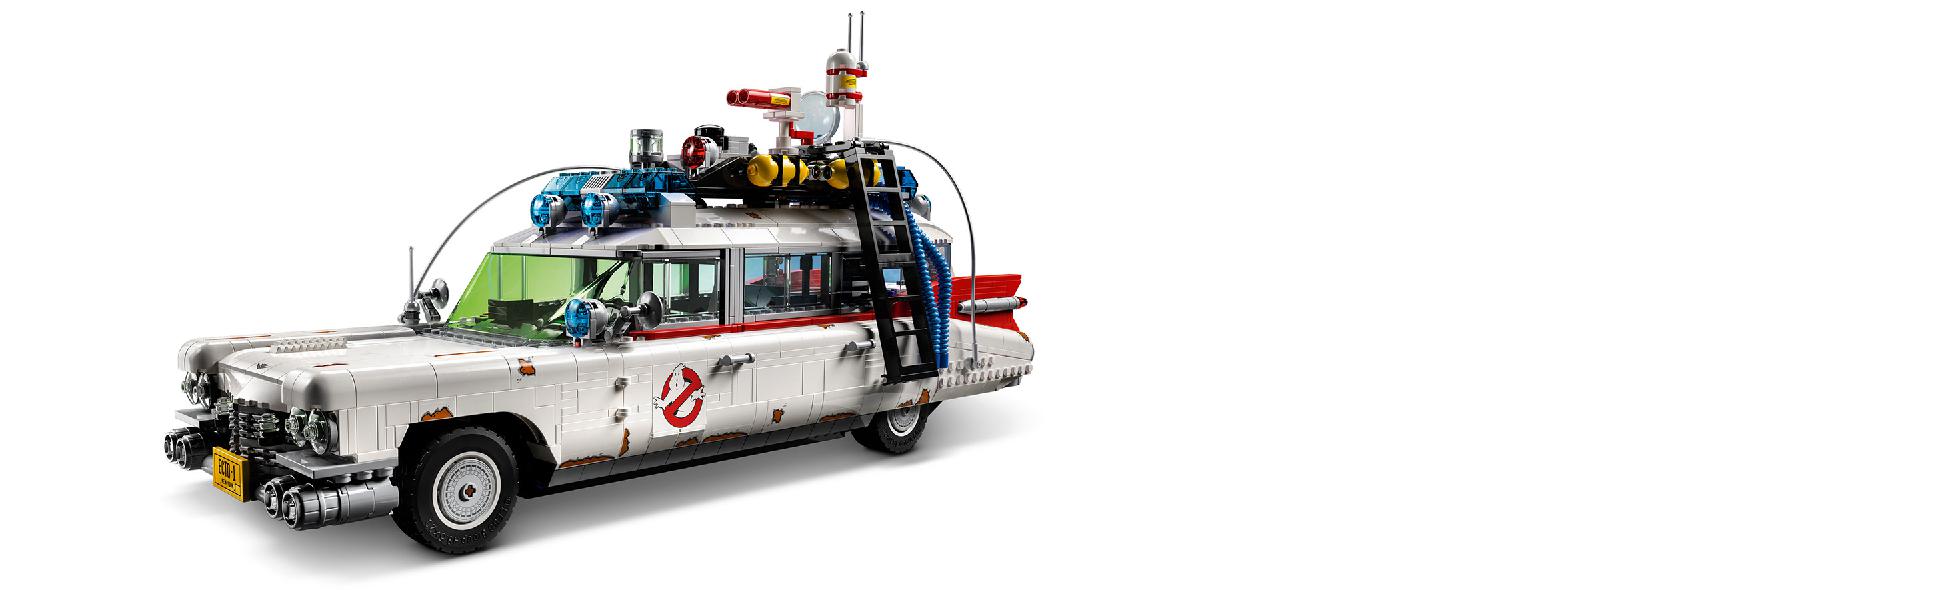 Ghostbusters™ ECTO-1 10274